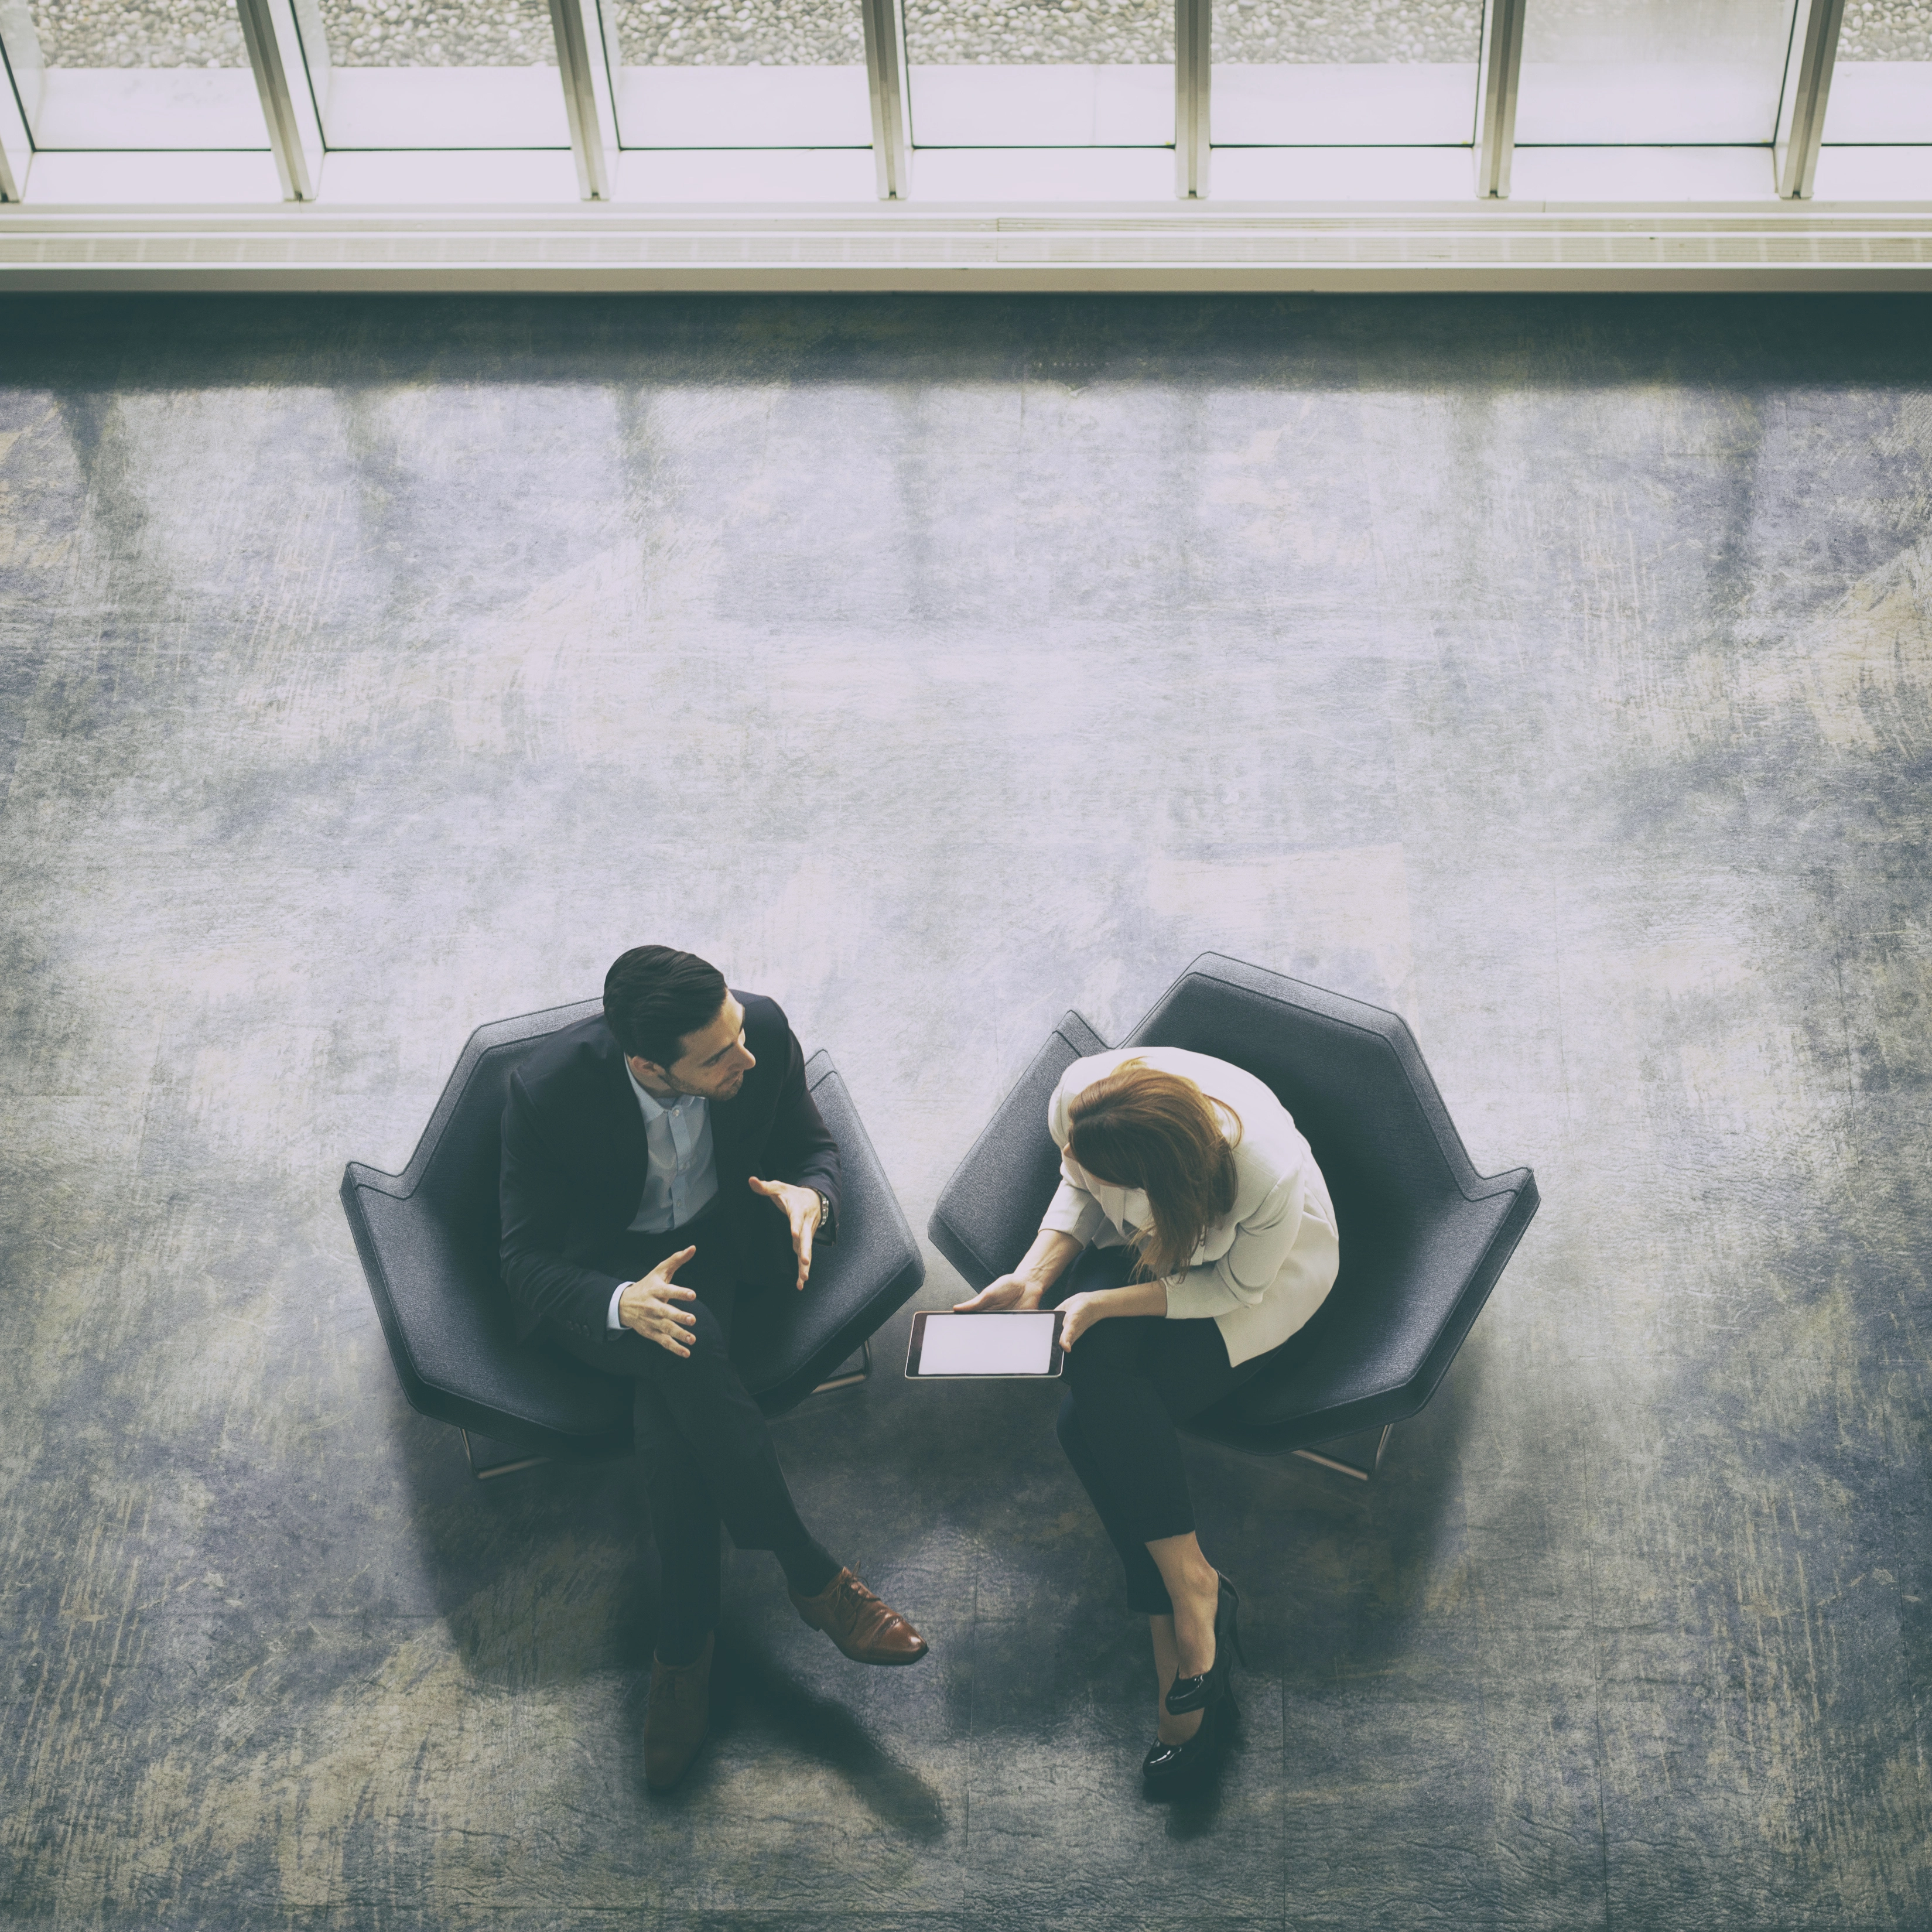 Man and woman discussing a new self-insurance and casualty insurance collateral funding program called Casualty insurance collateral funding while seated in two comfortable chairs